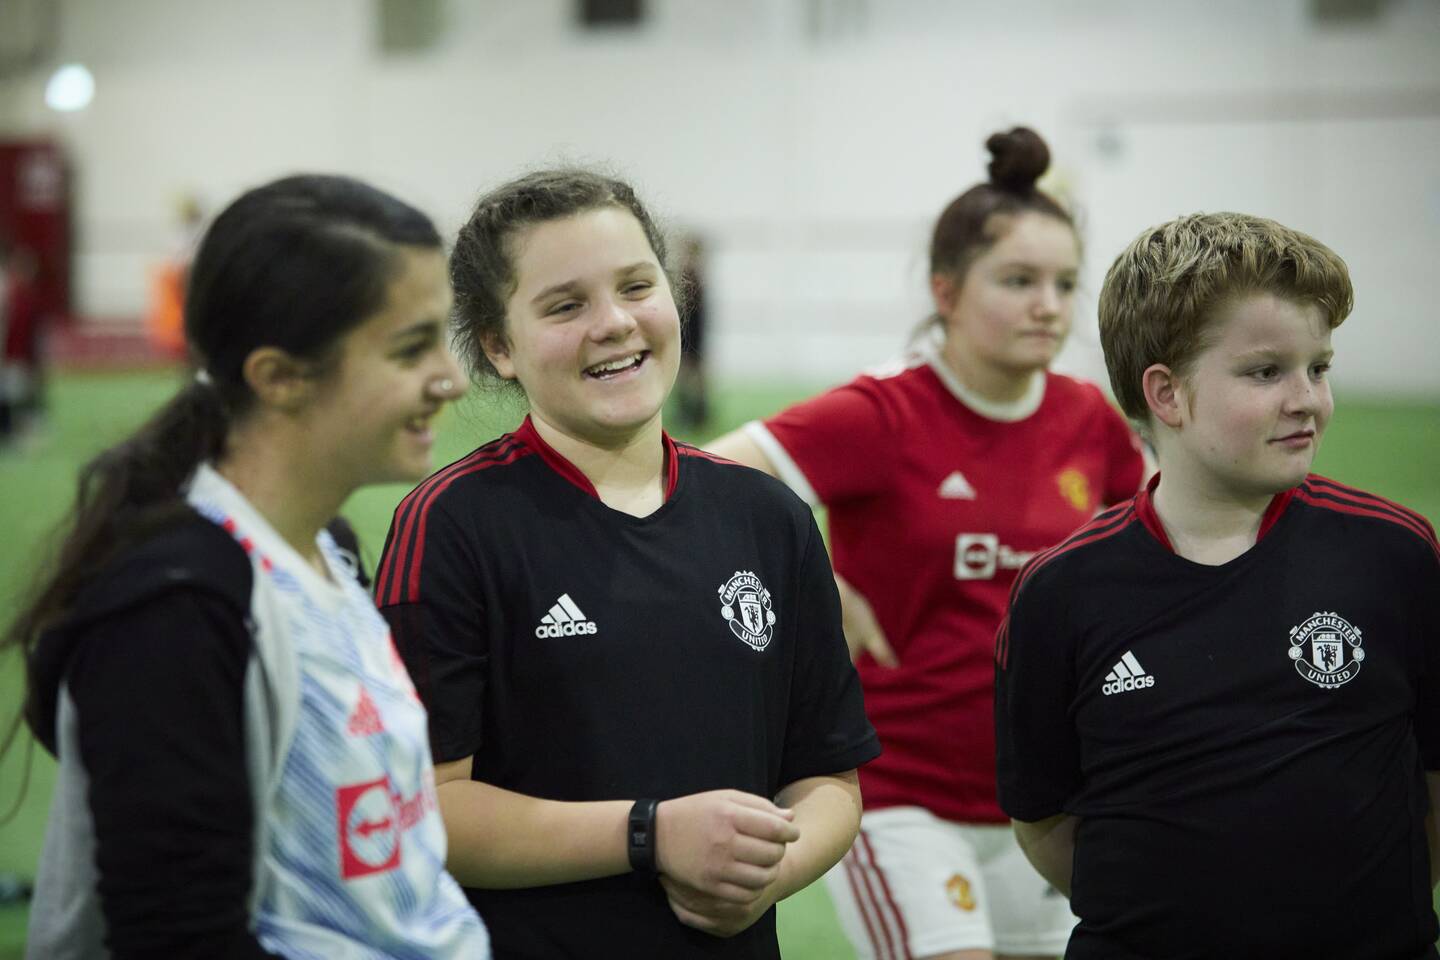 A group of young people in a training session at Manchester united fc foundation